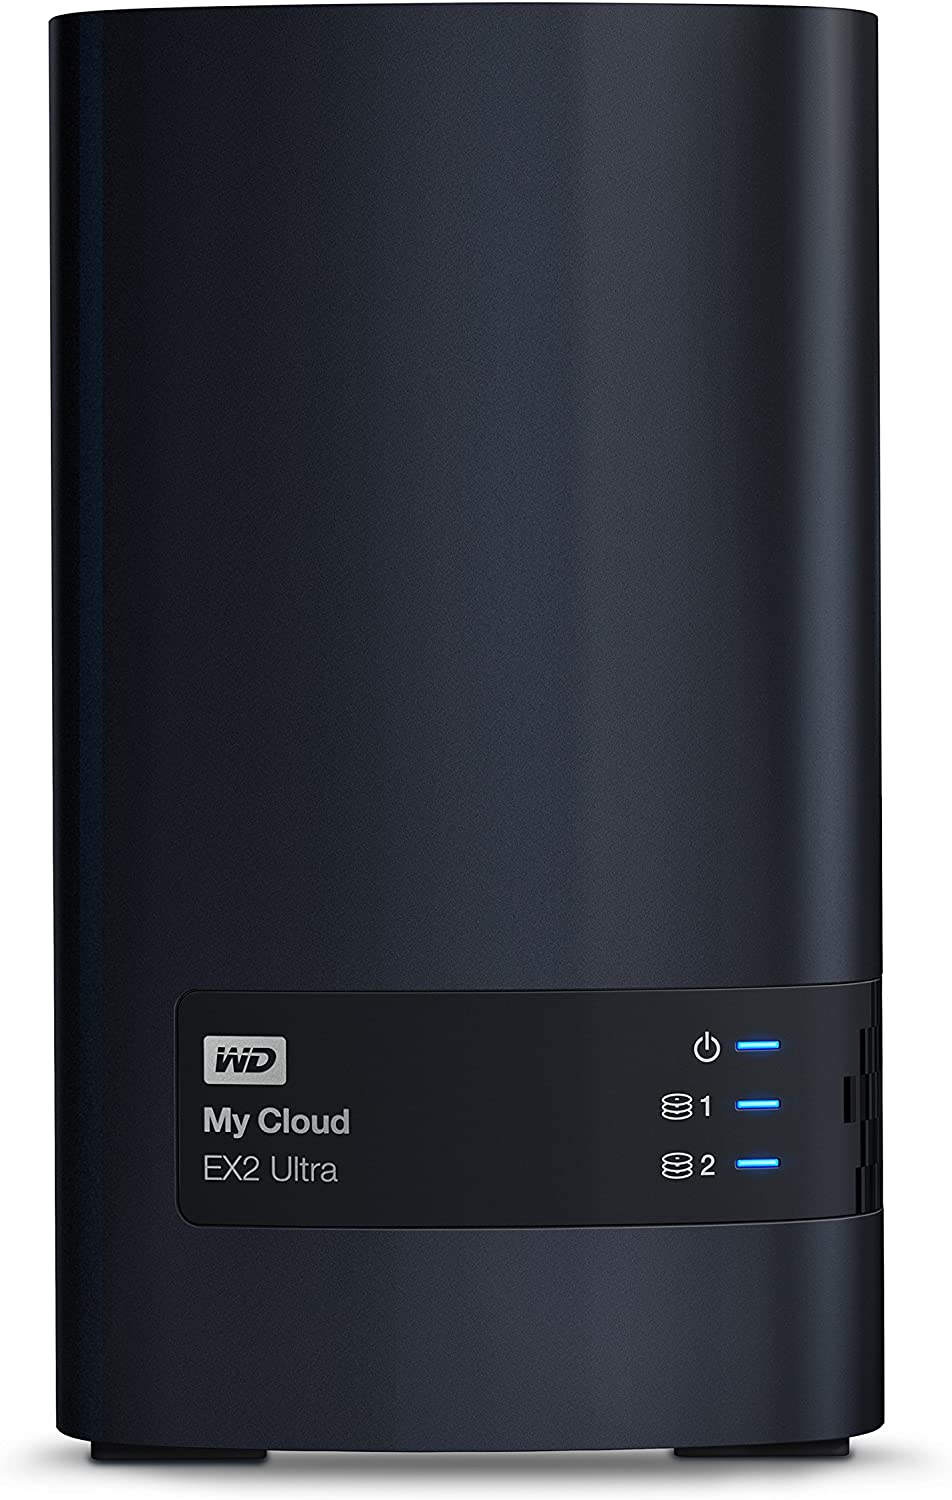 WD My Cloud EX2 Ultra dual-bay NAS box (unpopulated)